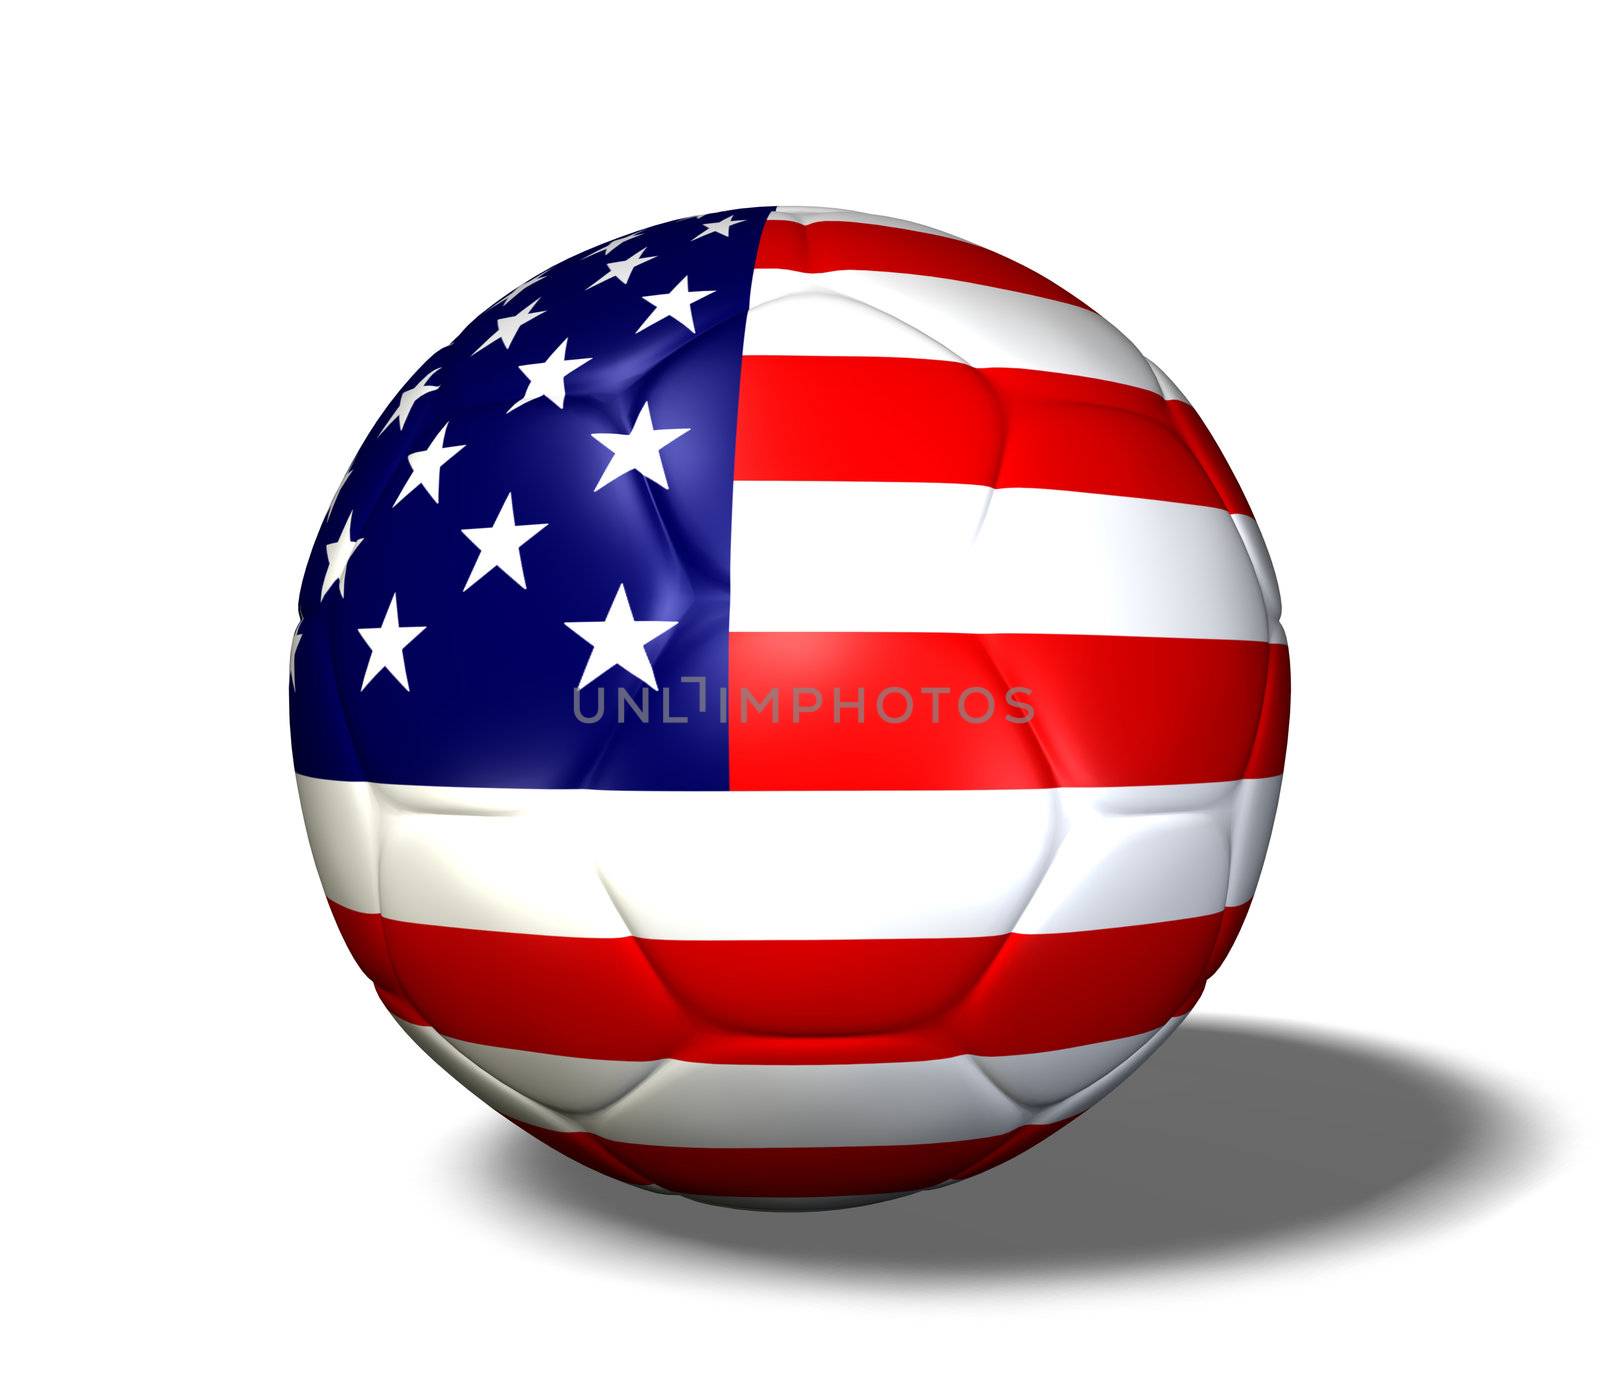 USA Soccerball by nmarques74